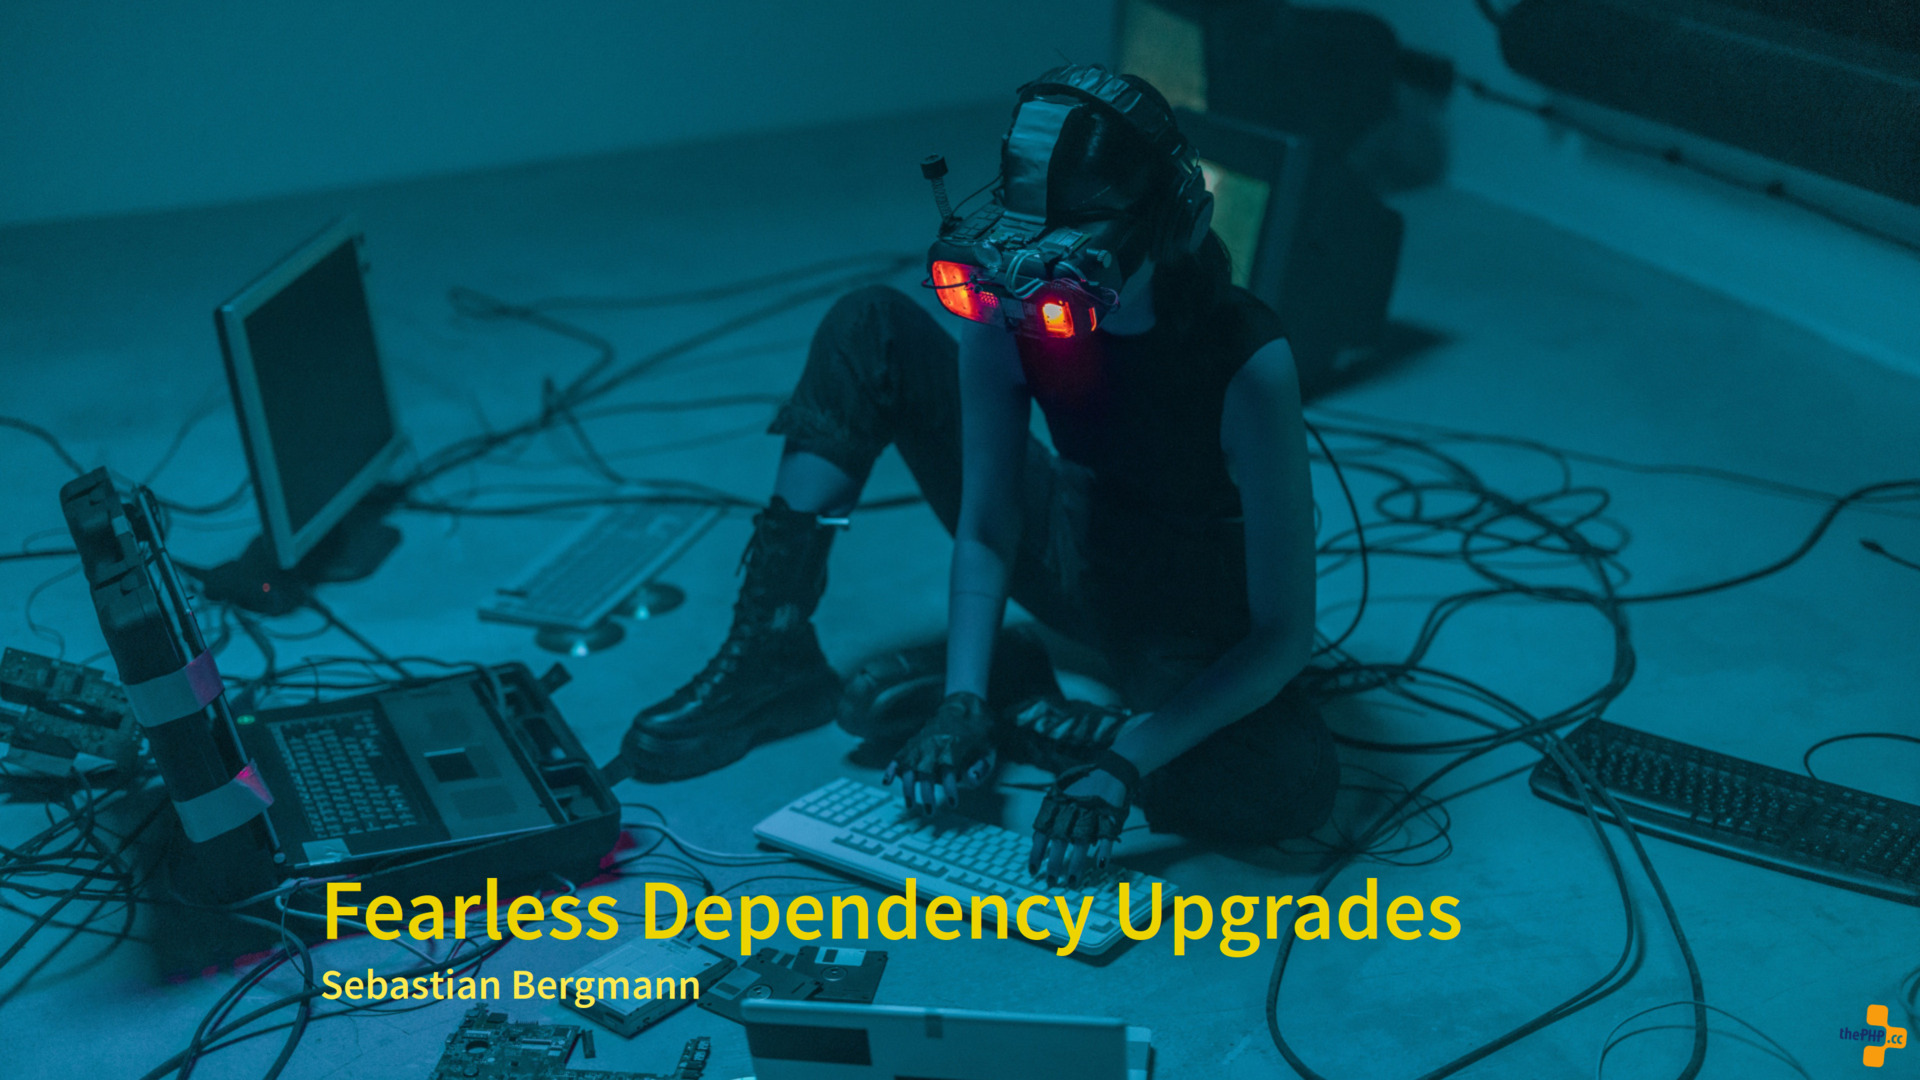 Fearless Dependency Upgrades